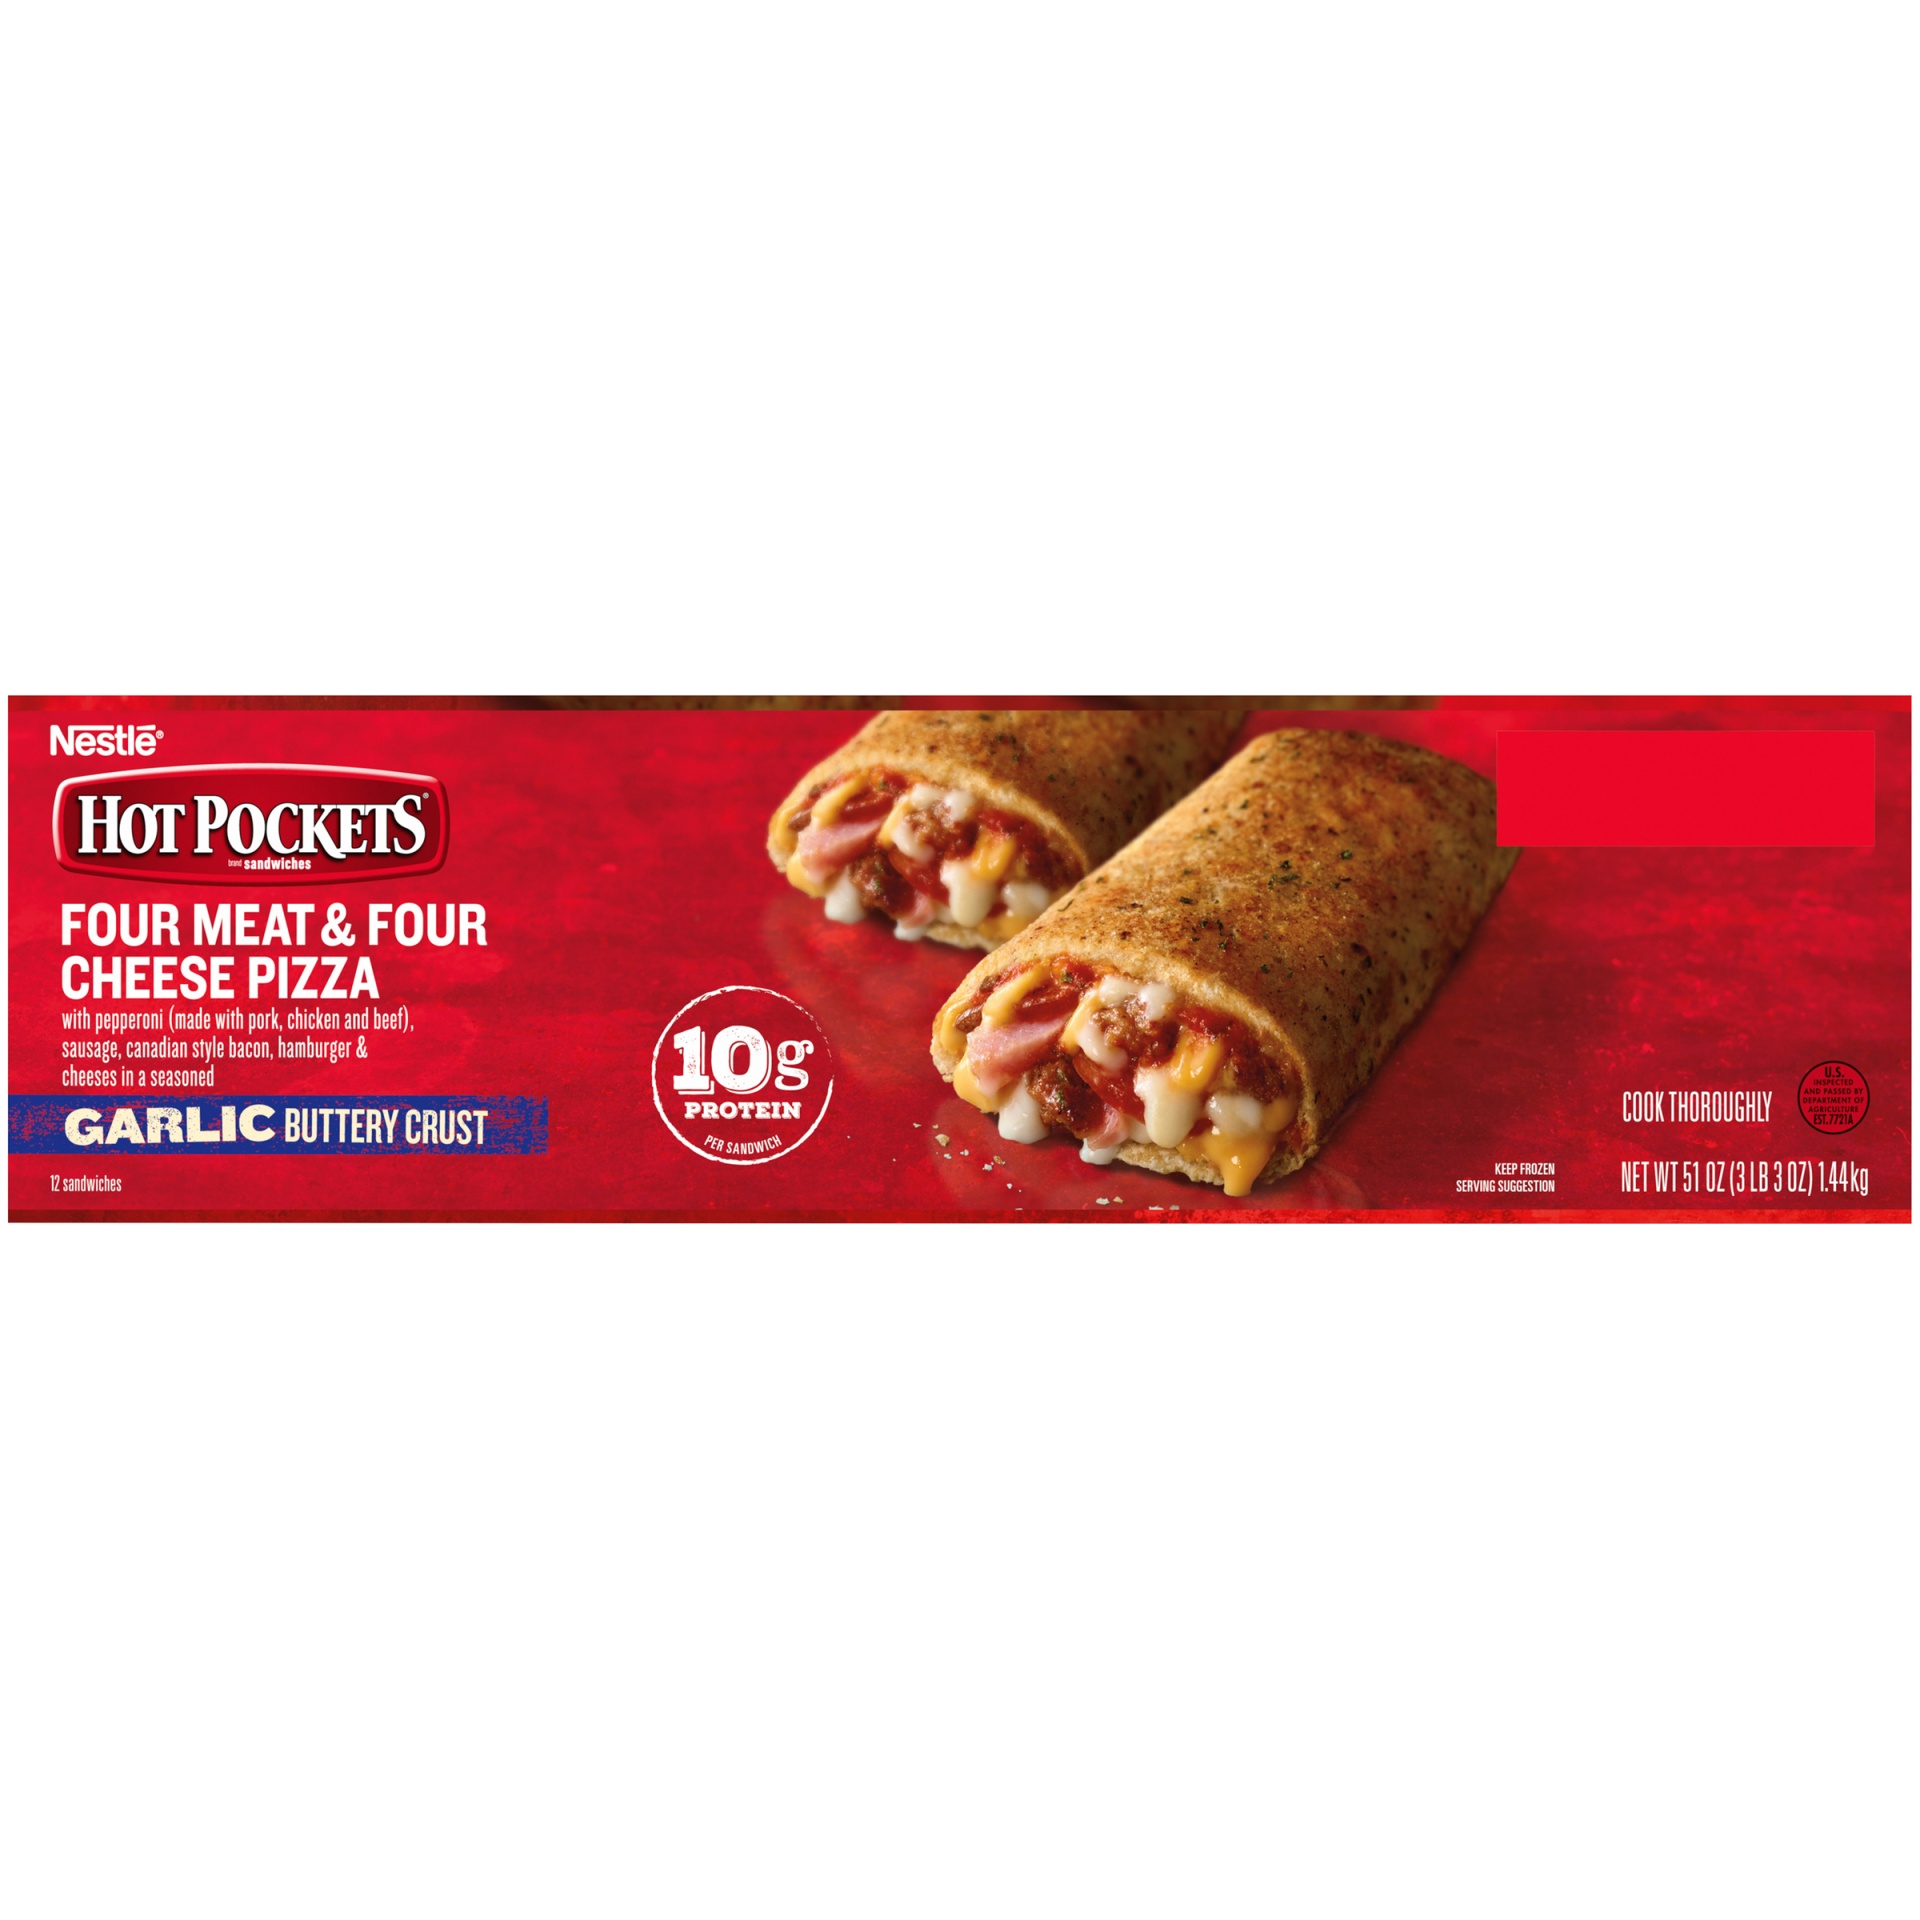 slide 5 of 6, Hot Pockets Four Meat And Four Cheese Pizza Garlic Buttery Crust Frozen Sandwiches, 12 ct; 4.5 oz